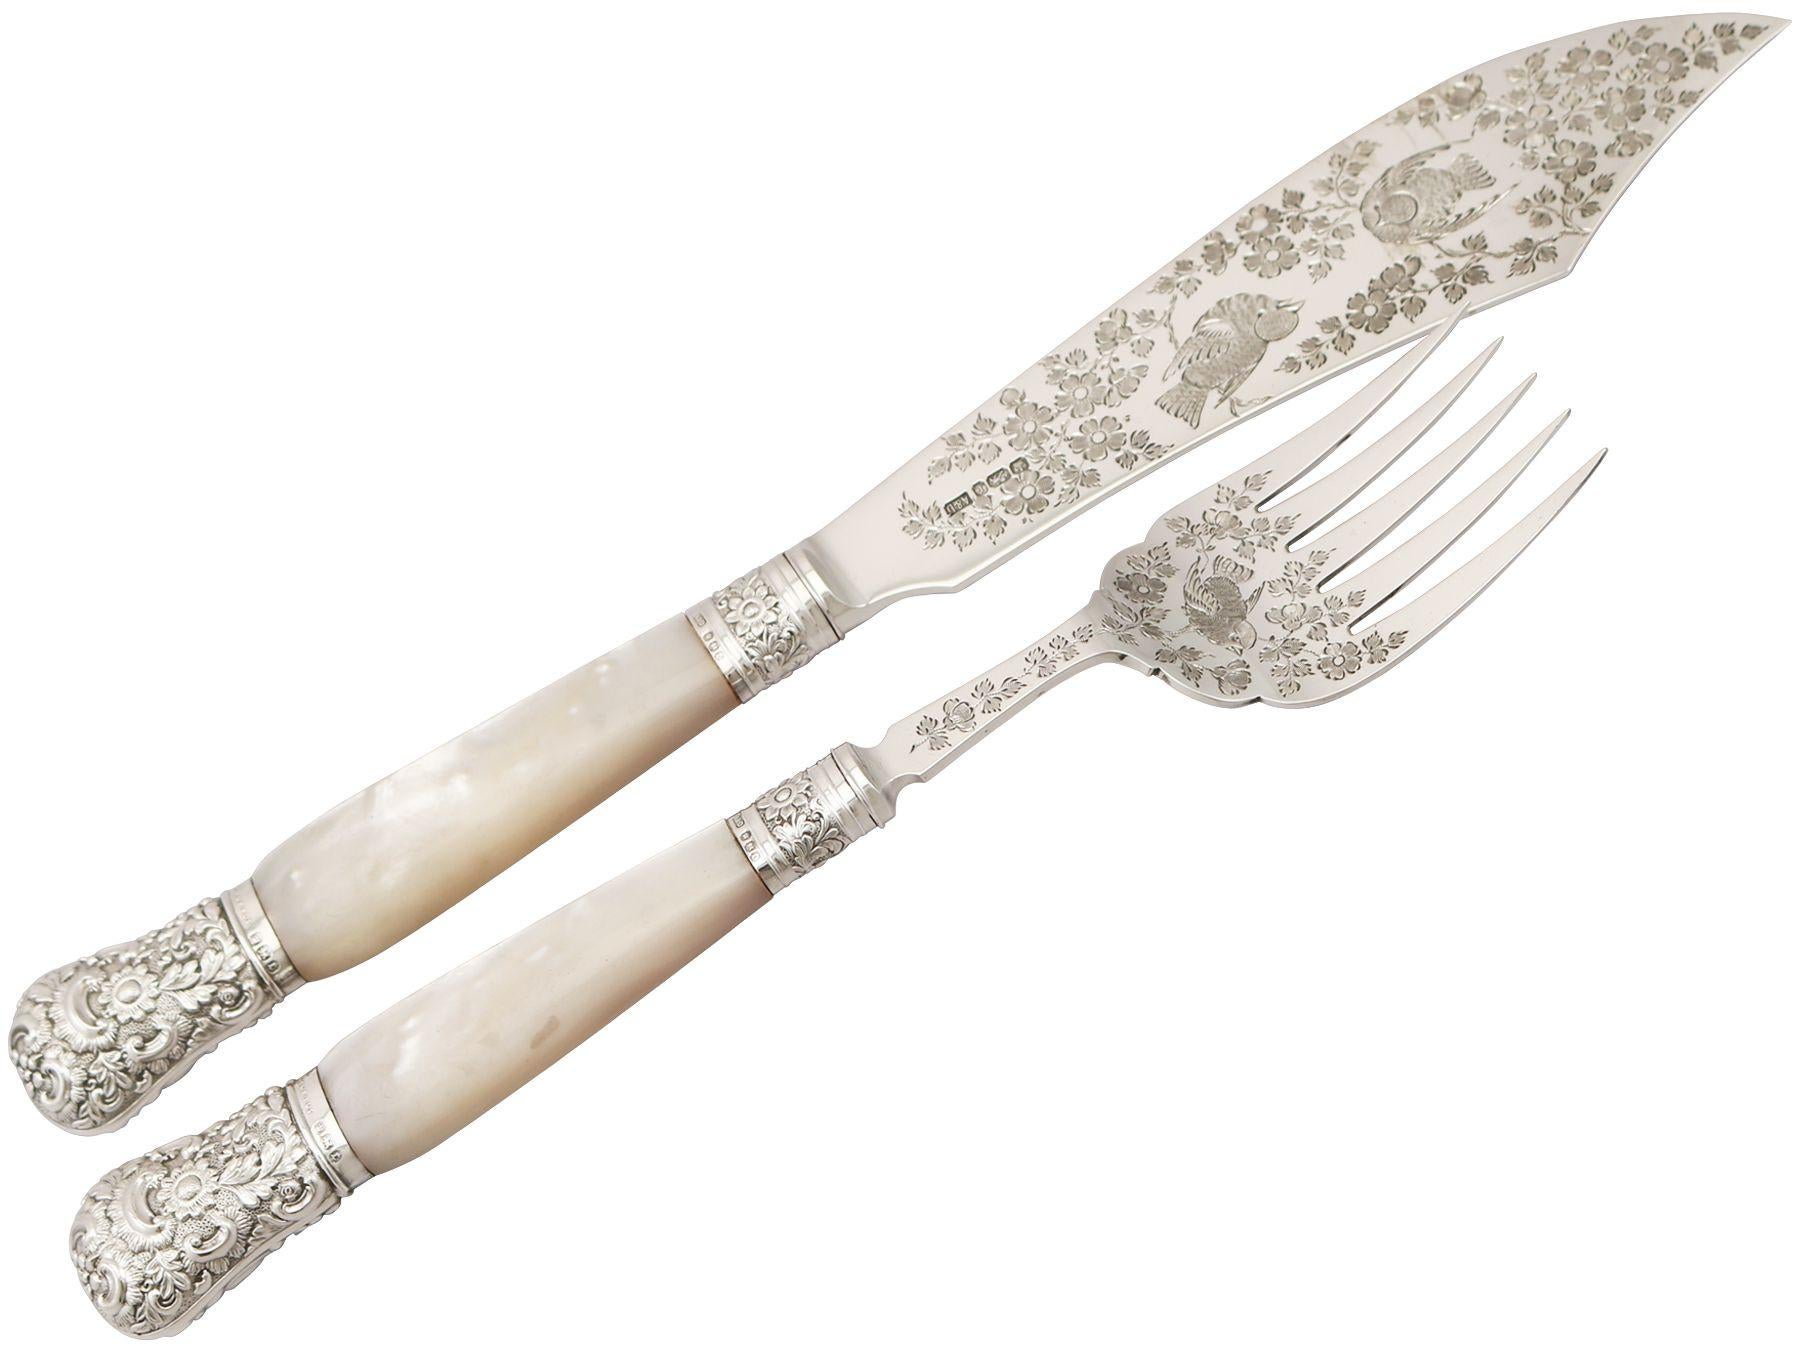 An exceptional, fine and impressive pair of antique Victorian English sterling silver and mother of pearl fish servers - boxed; an addition to our silver flatware collection.

This exceptional pair of antique mother of pearl fish servers consists